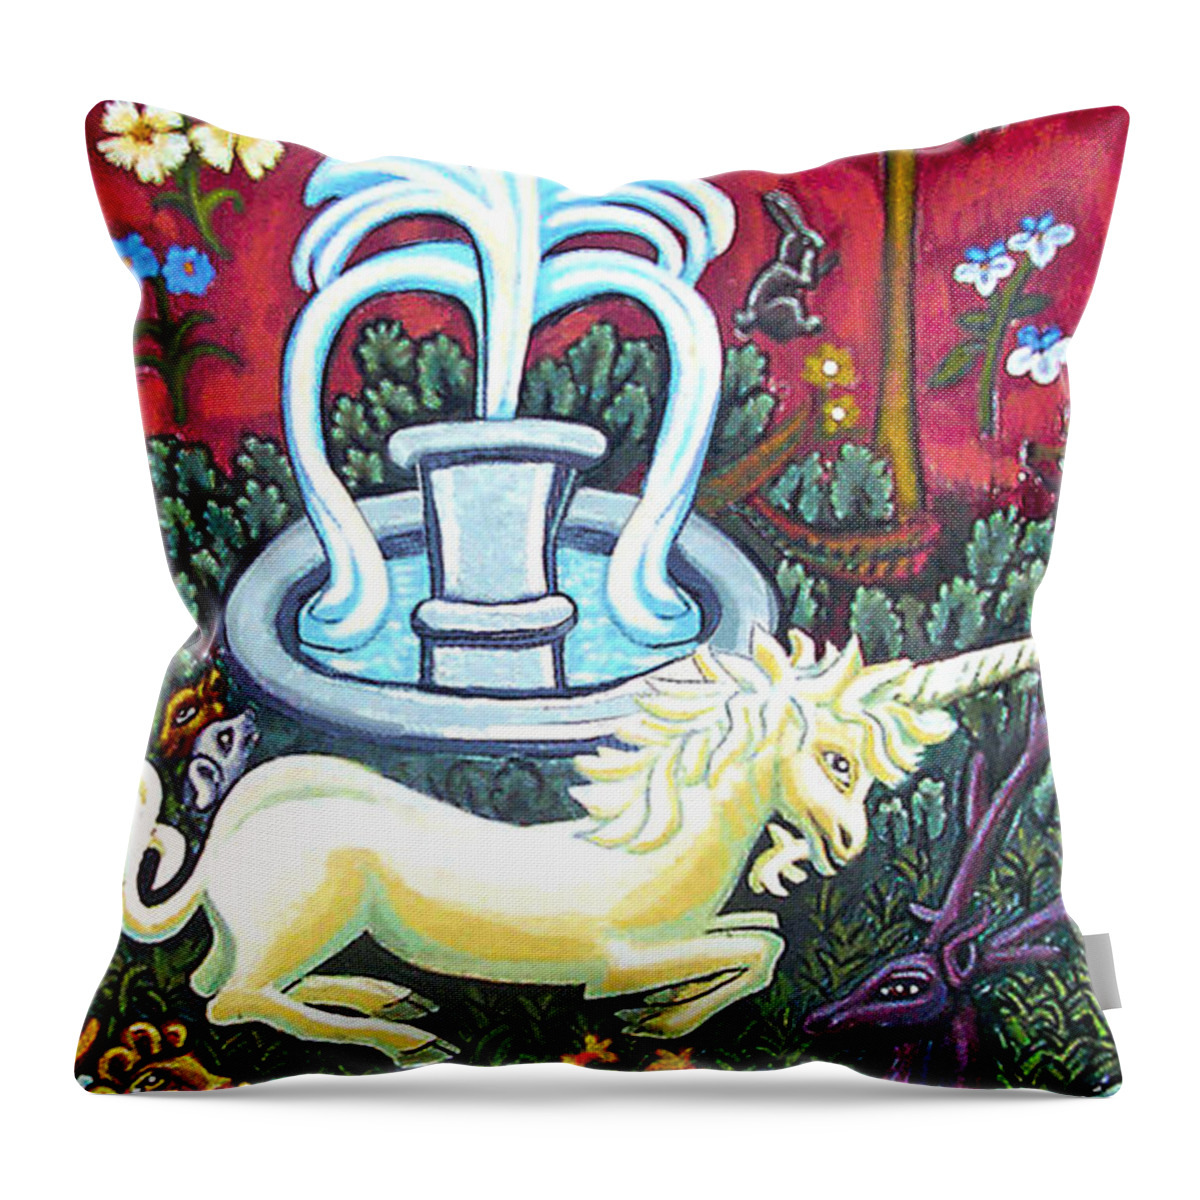 Unicorn Tapestries Throw Pillow featuring the painting The Unicorn and Garden by Genevieve Esson